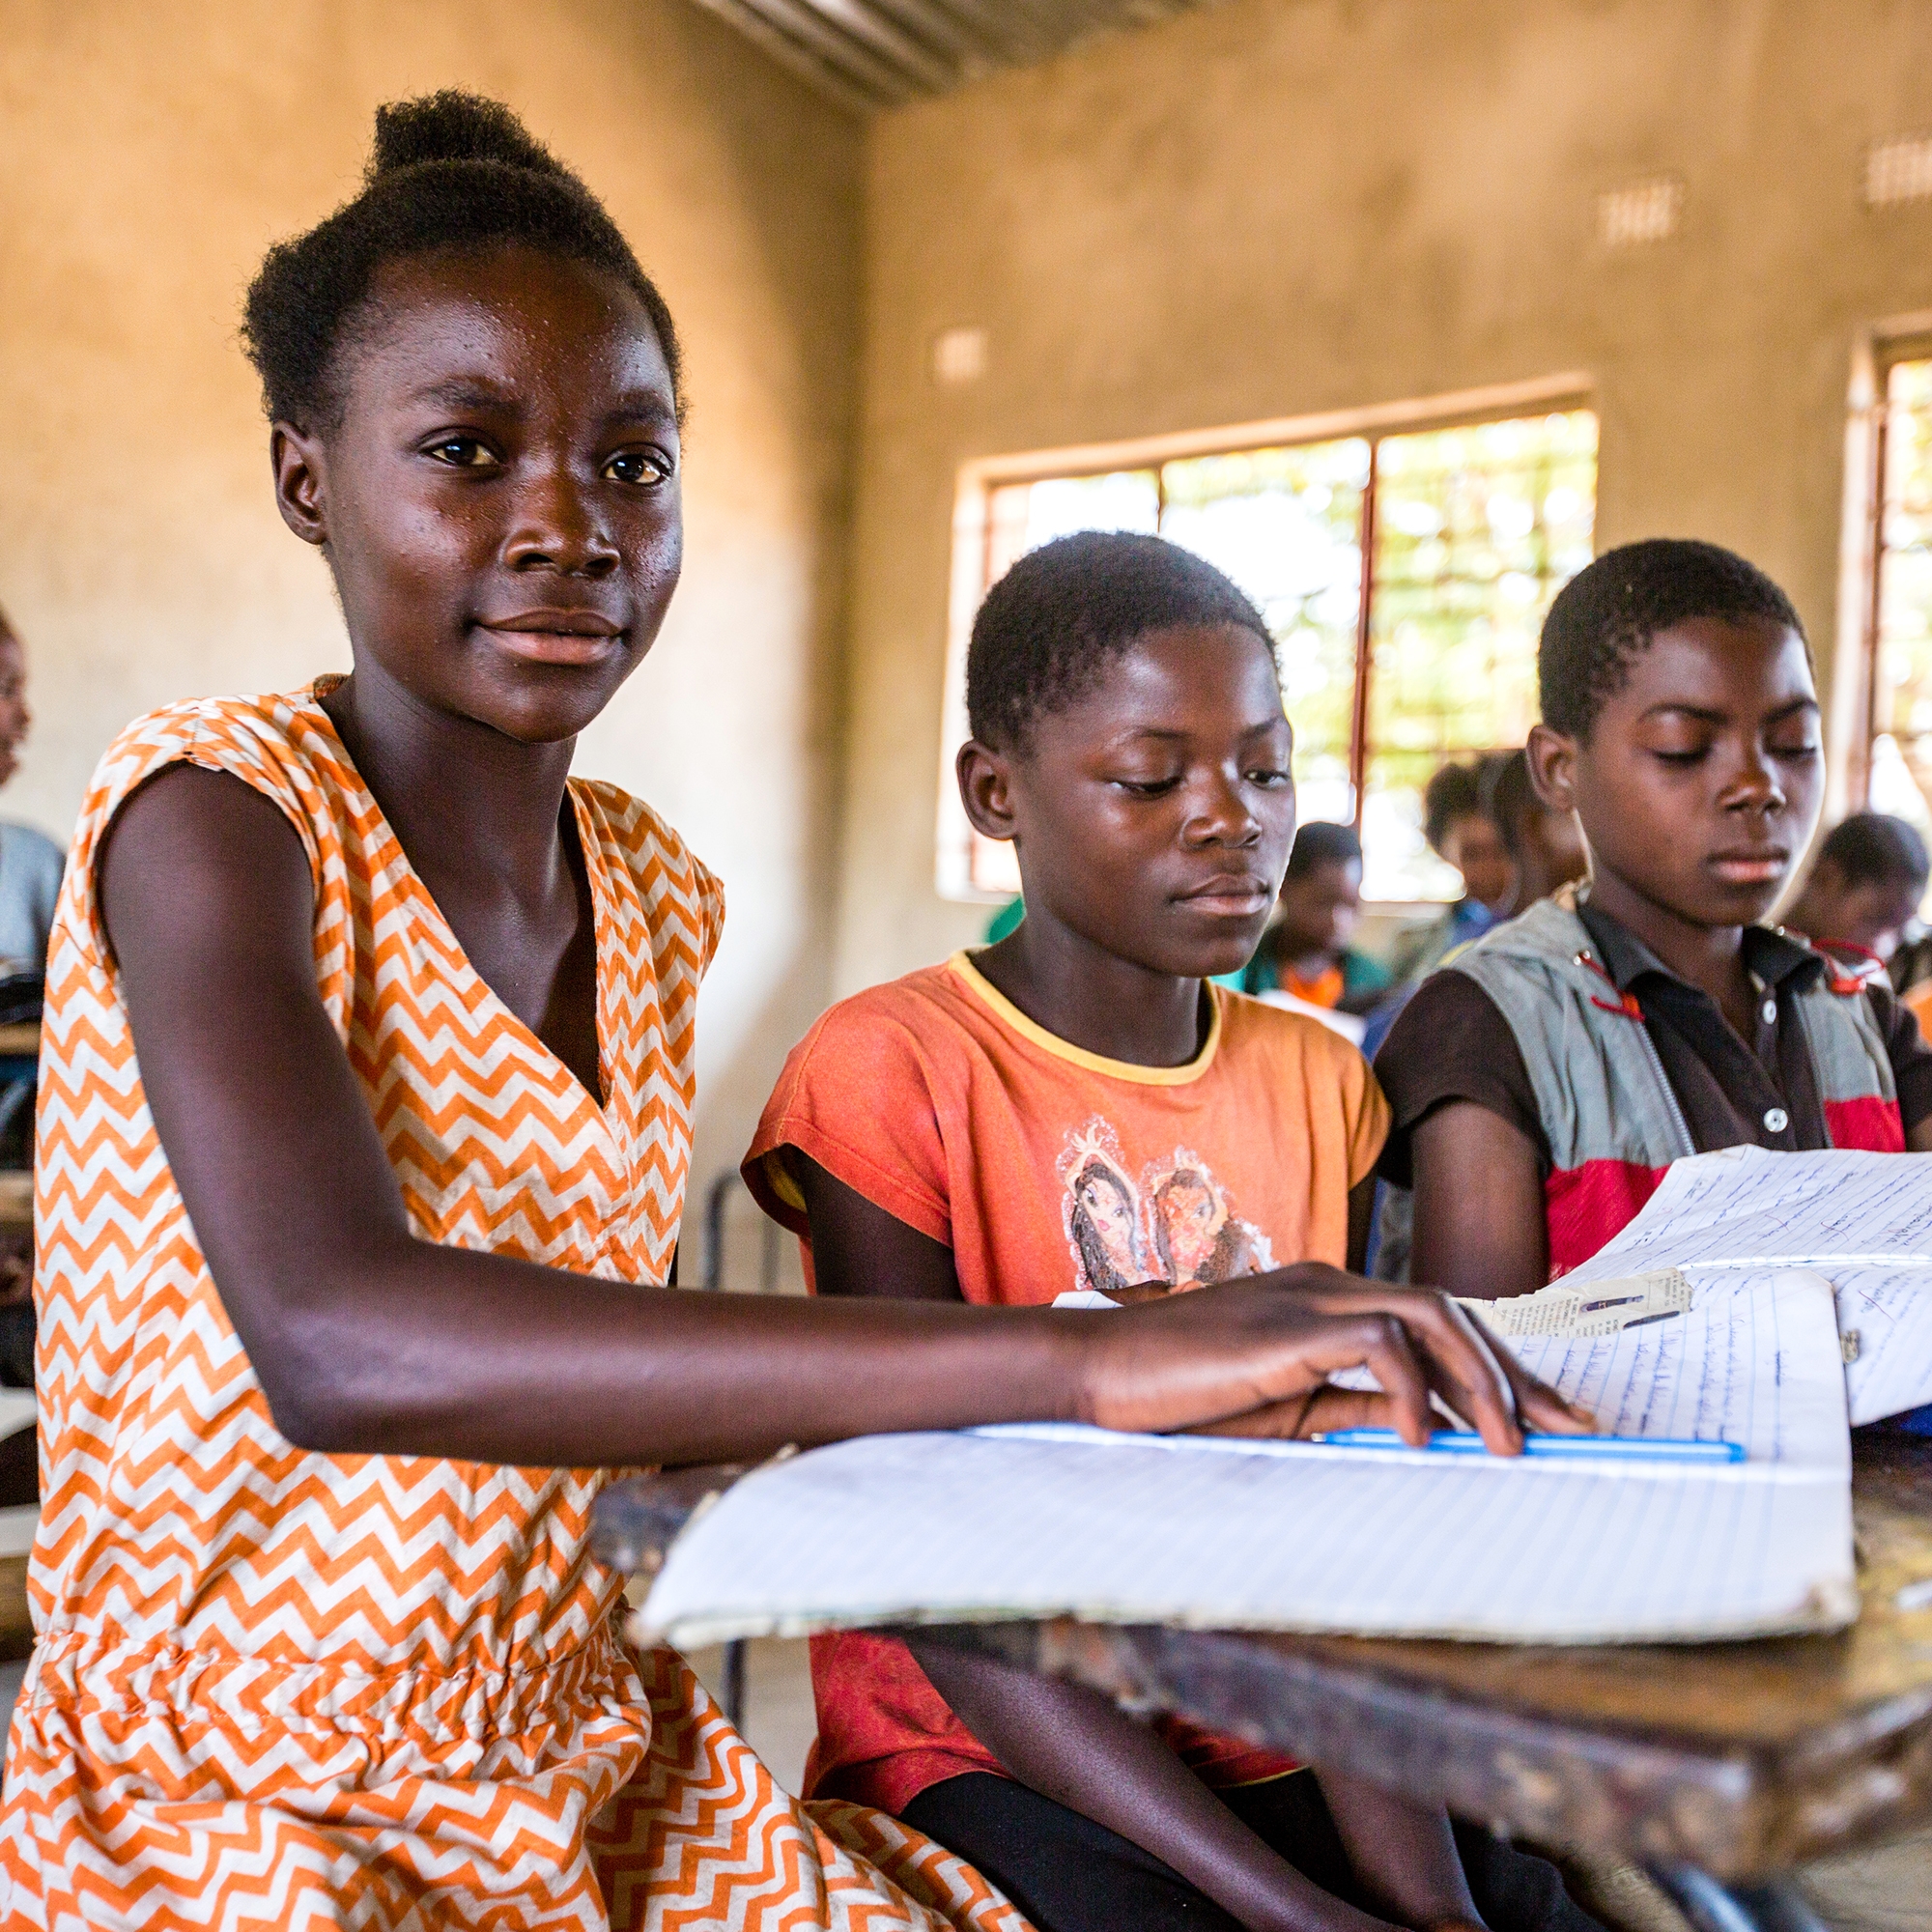 A 12-year old girl in Zambia sits in a classroom among other students. She participates in a basic education program made possible through sponsorship. Photo Credit: Victoria Zegler/Save the Children, October 2016. 